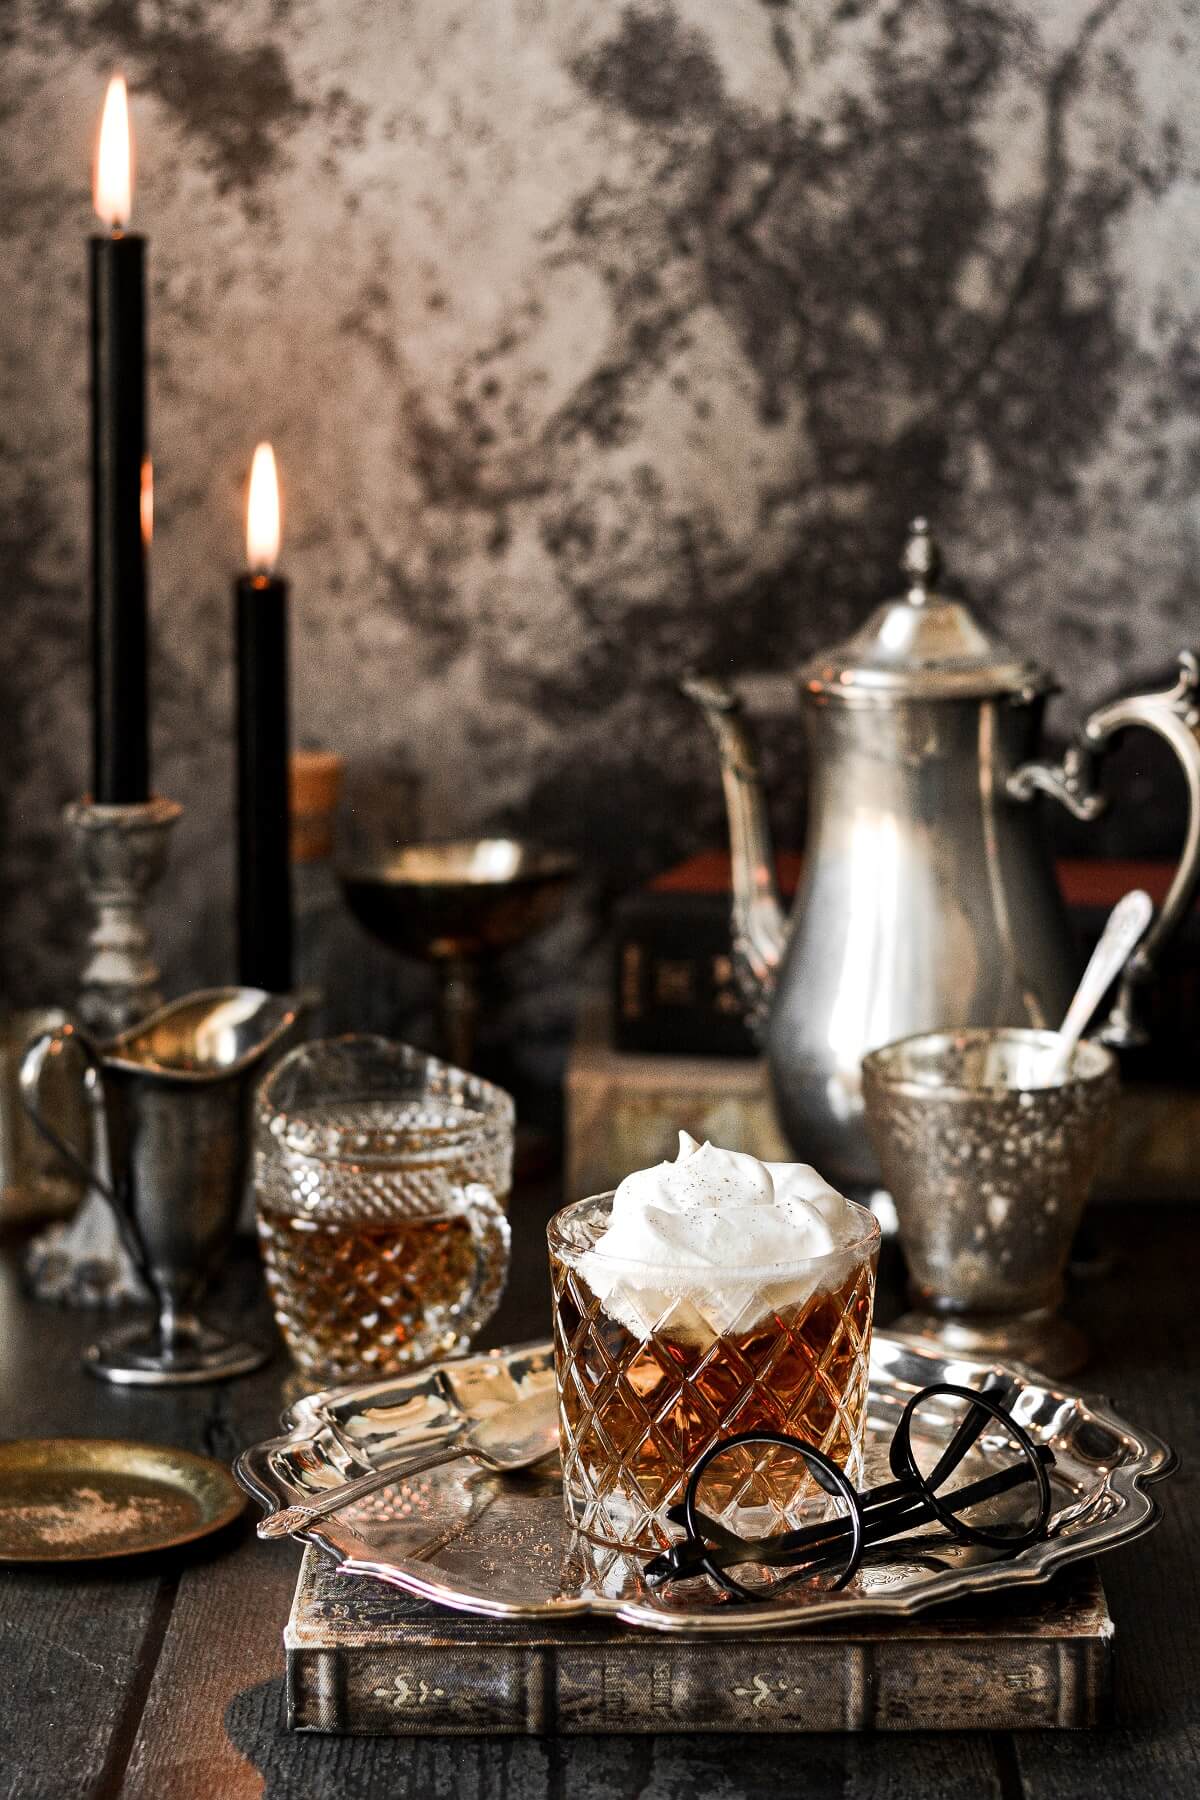 A dark and moody scene with a glass of butter beer, candles, and a silver tea pot.